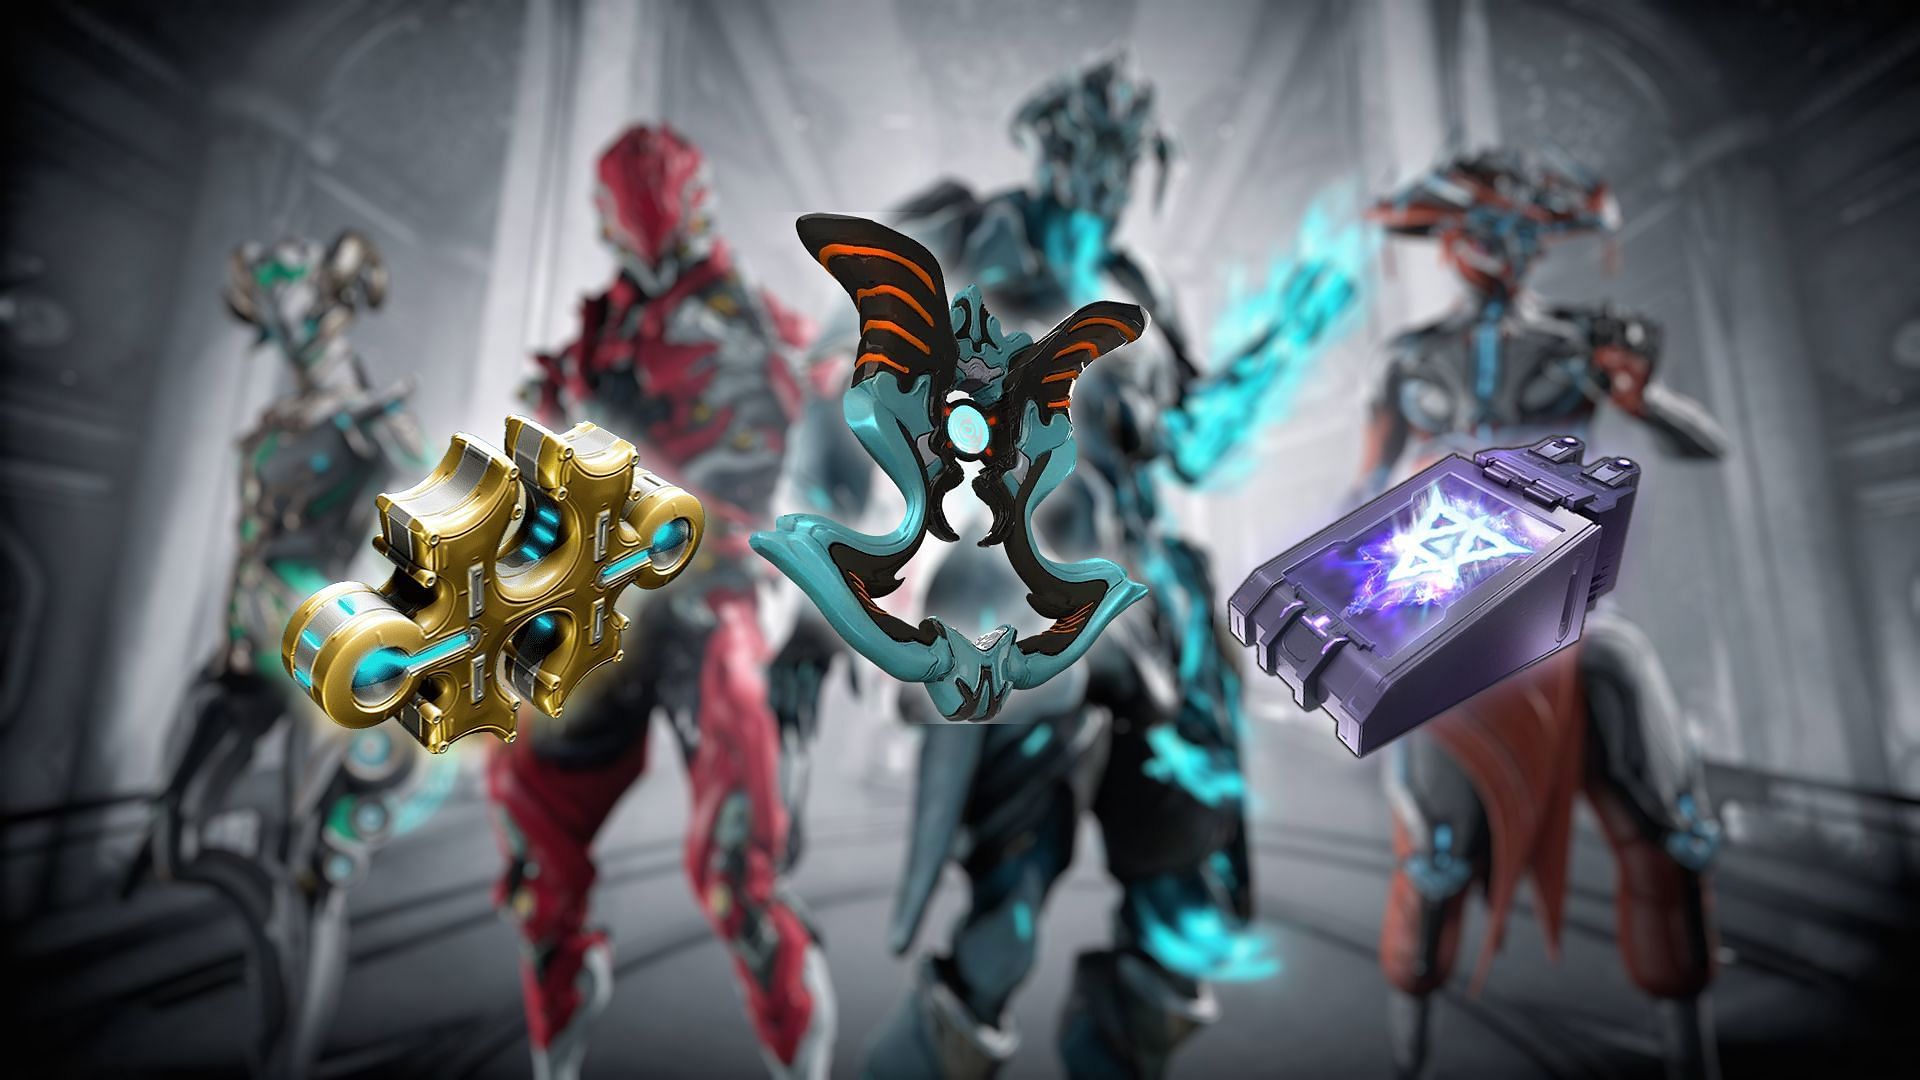 Warframe consumable items in the foreground: forma, amp arcane adapter, veiled riven cipher